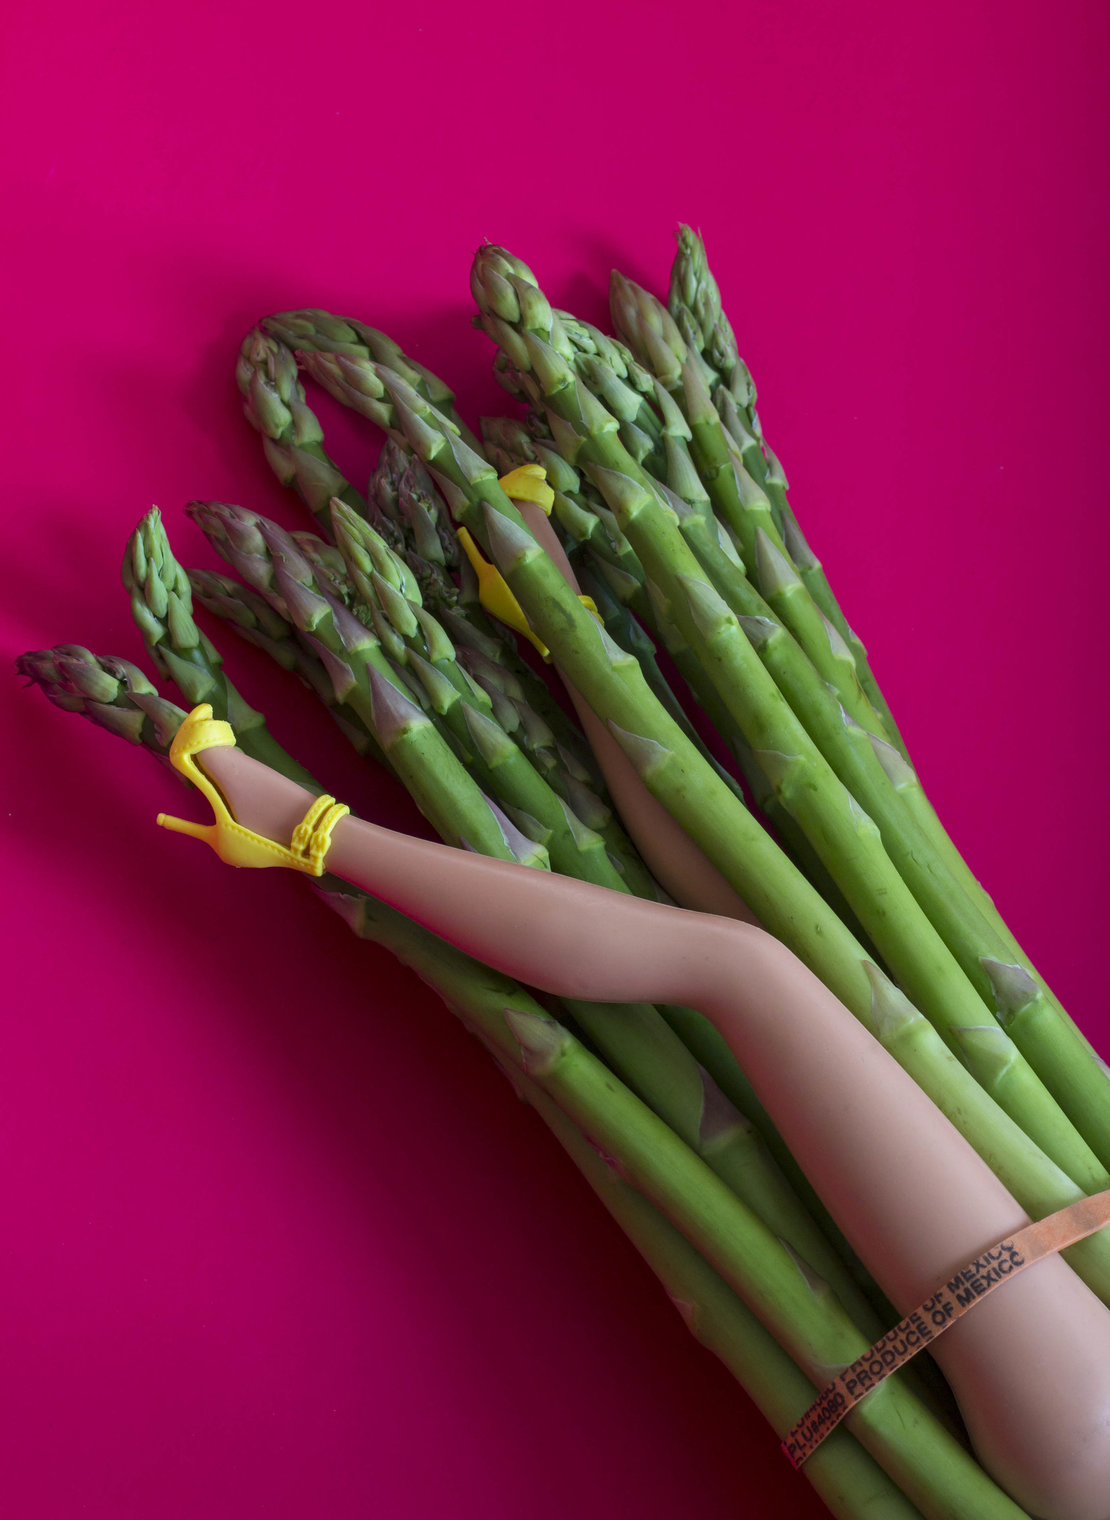 Asperges-Food photography- art photography